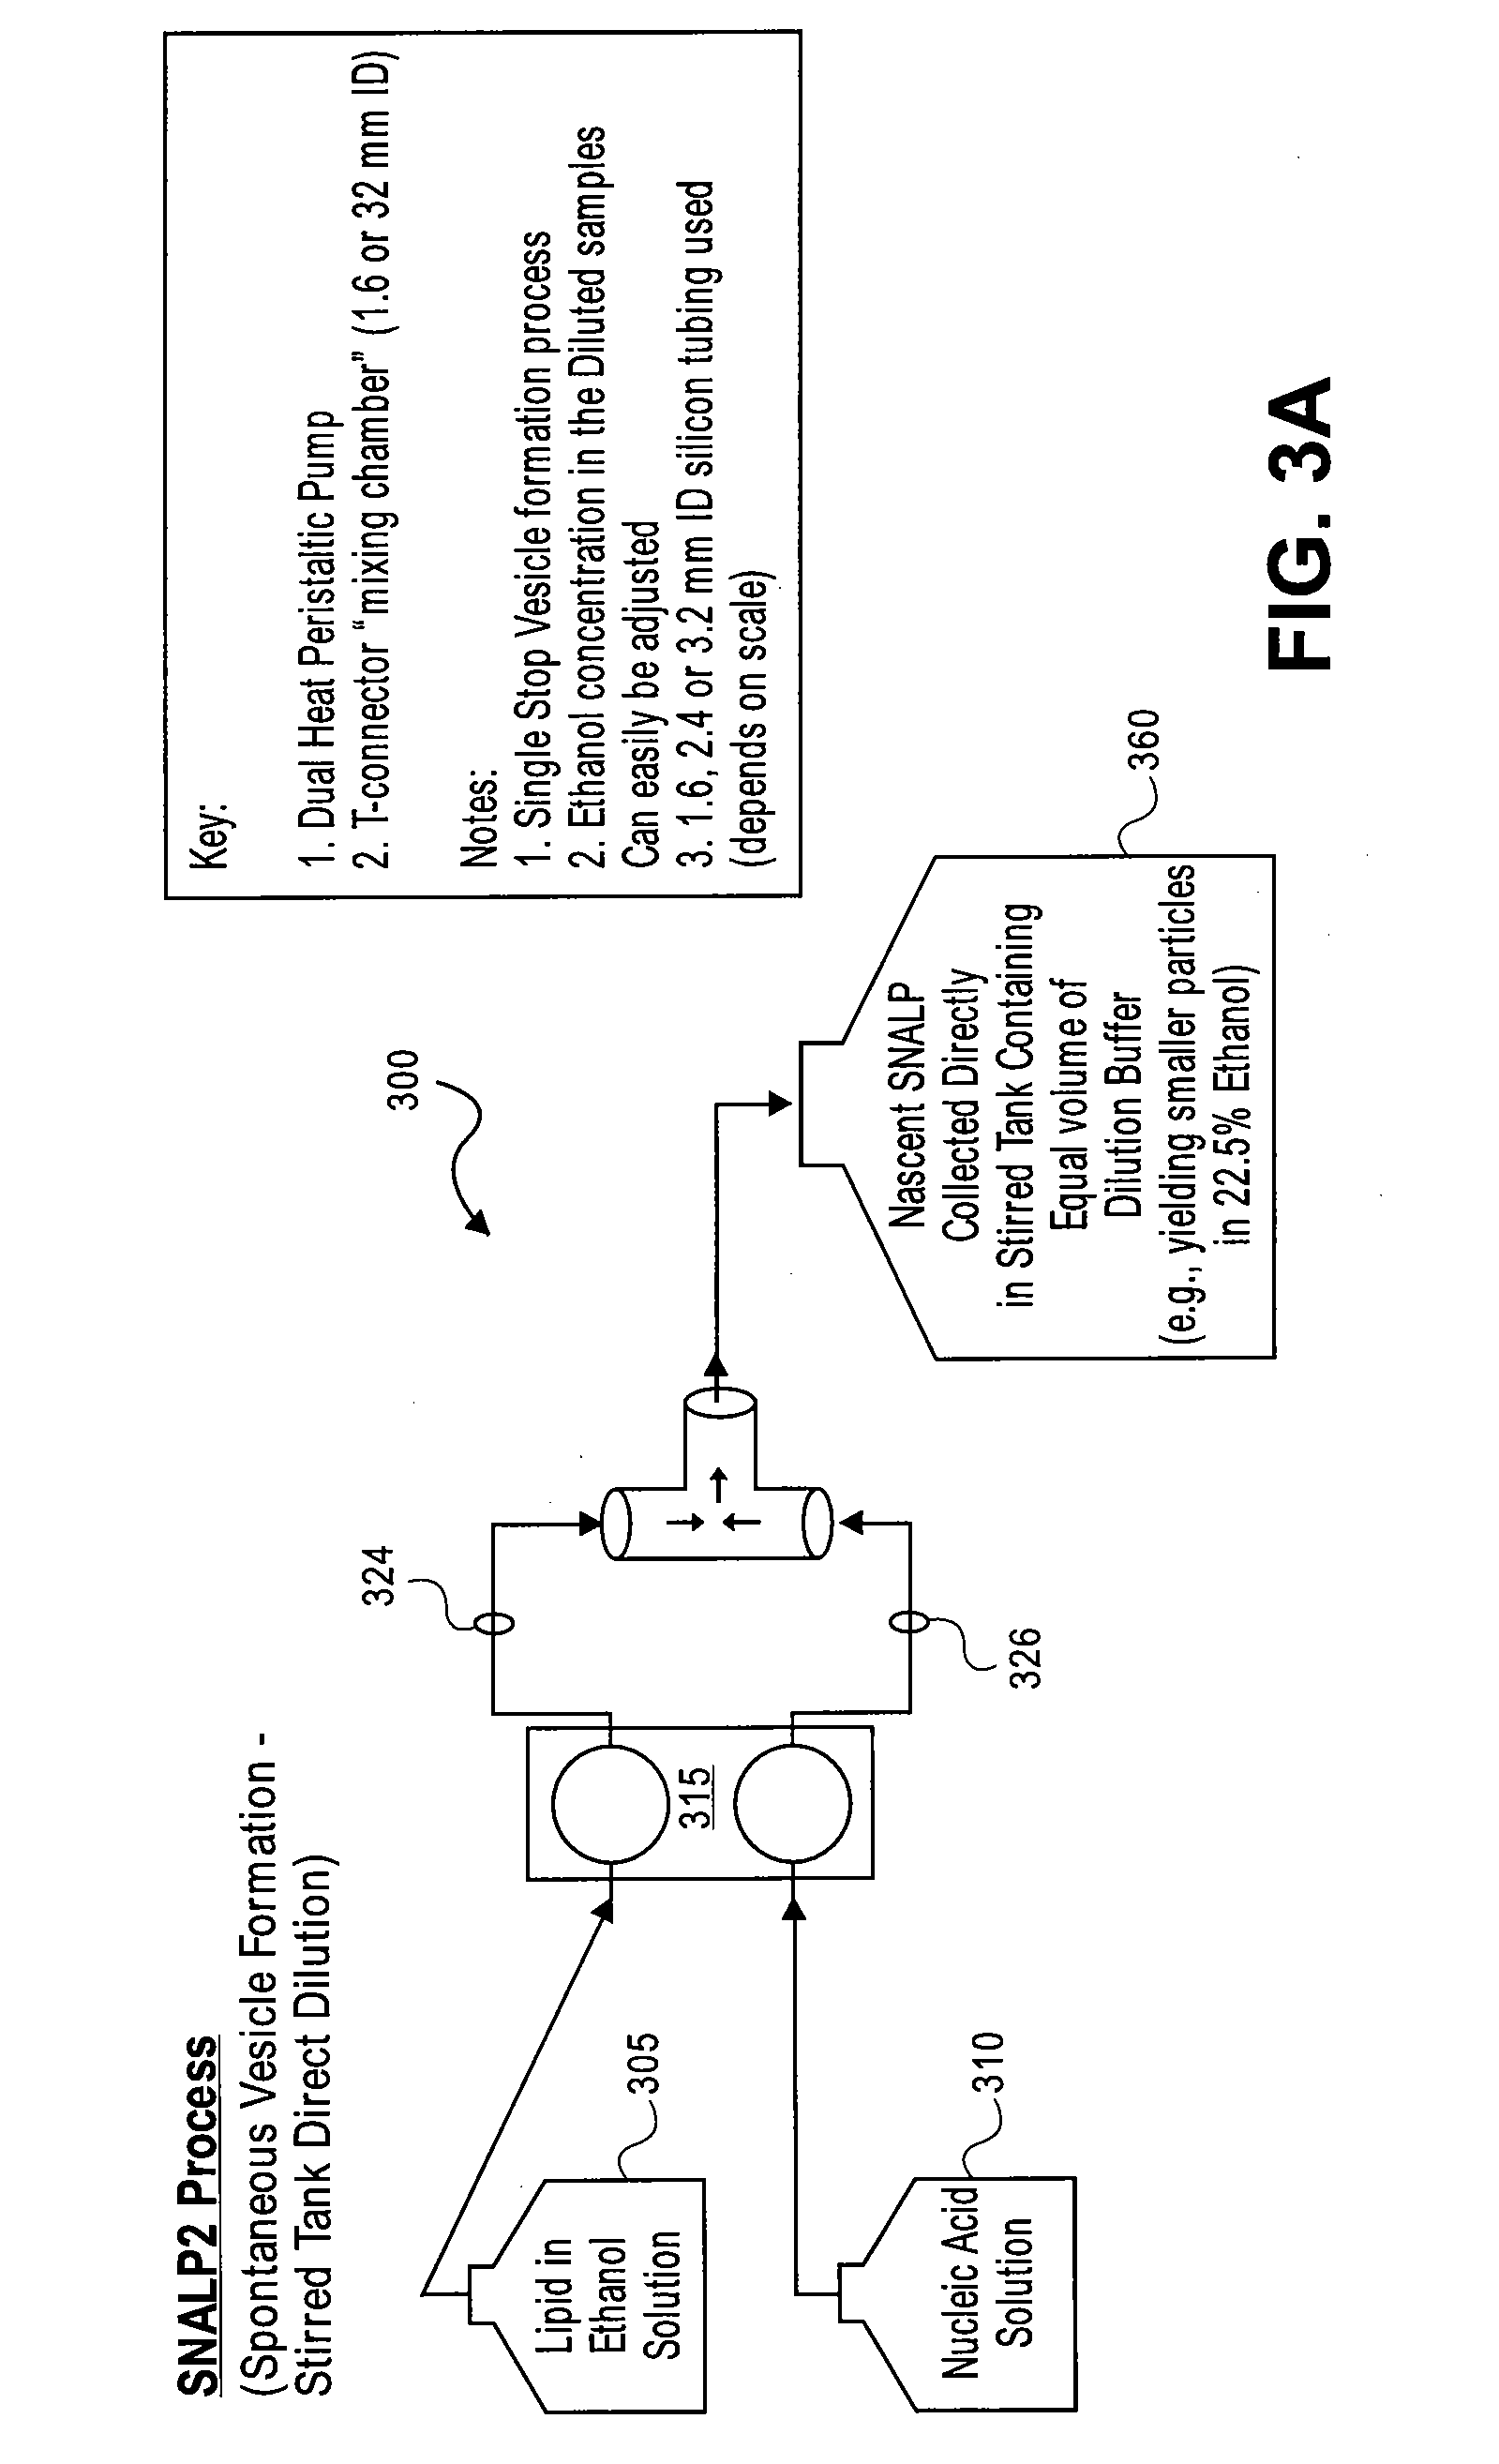 Systems and methods for manufacturing liposomes